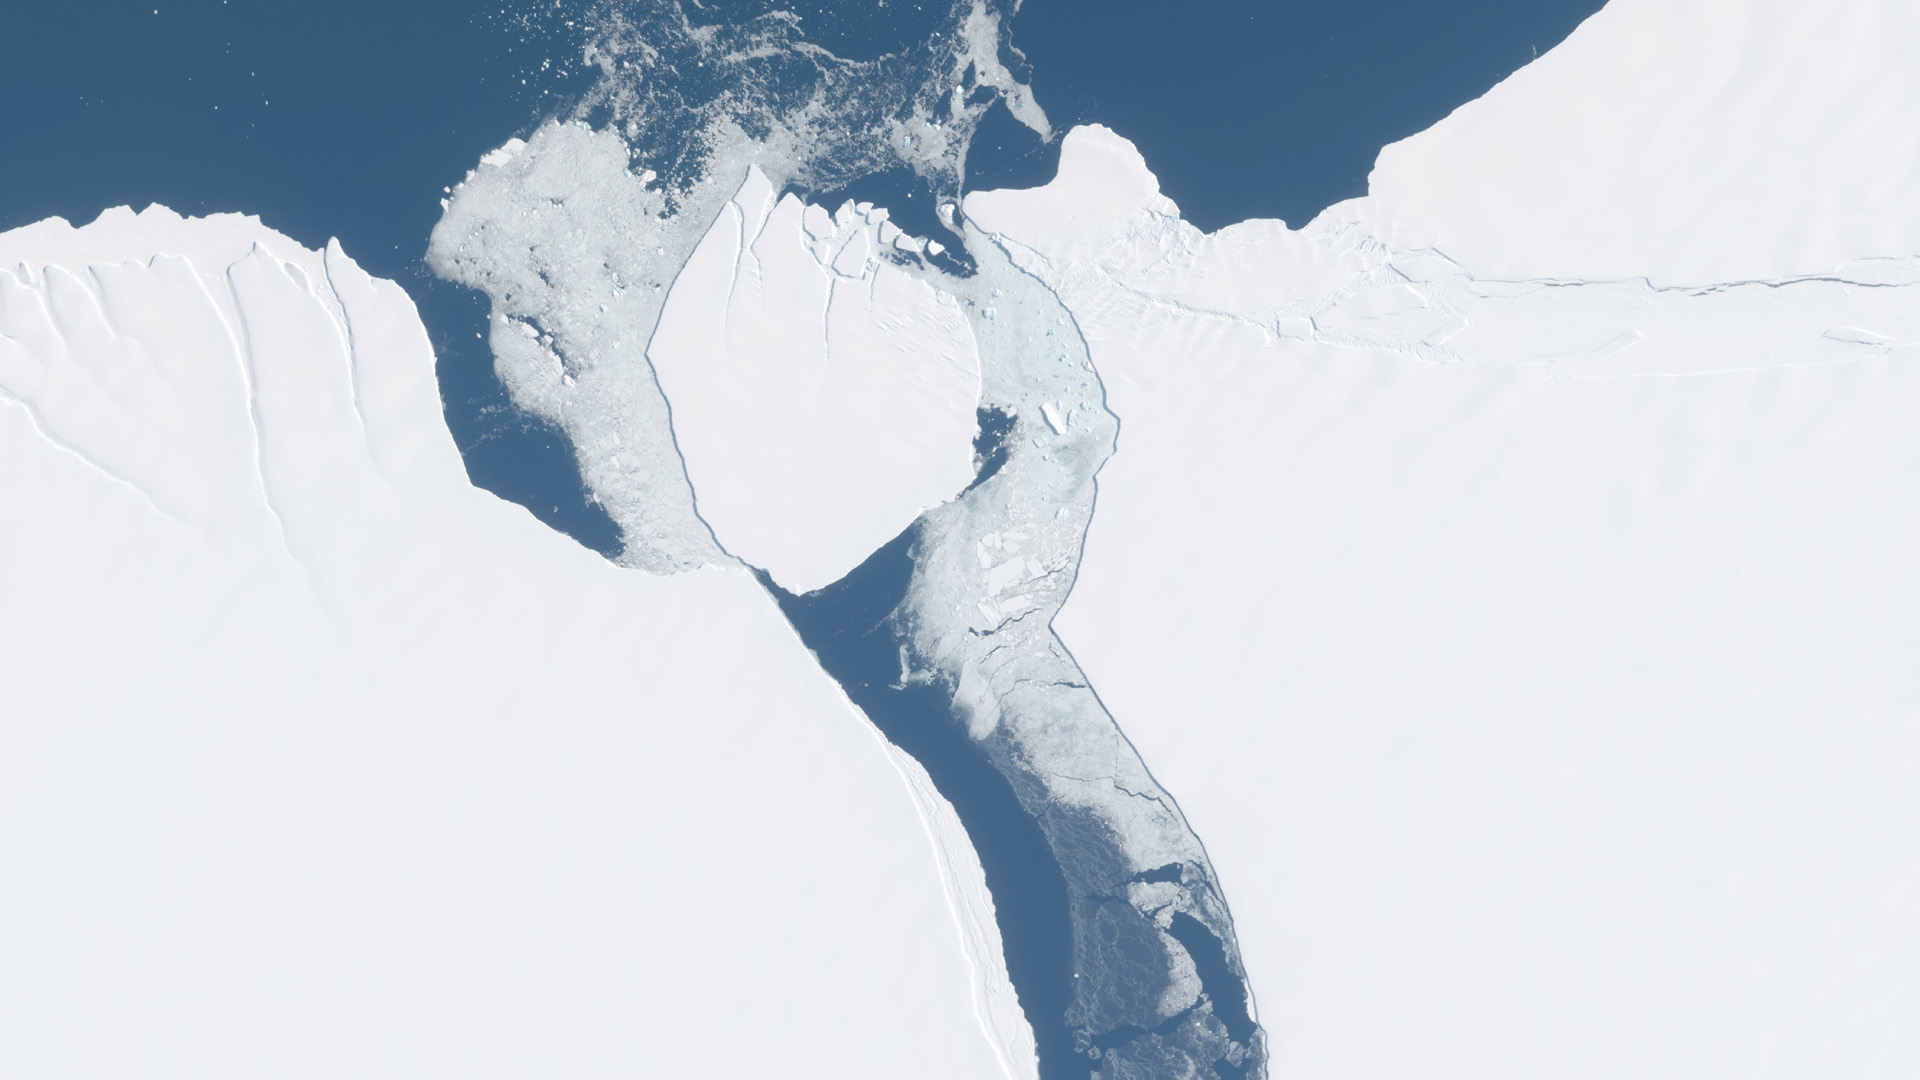 A detail of an Antarctic iceberg that has just broken off from a large floating ice shelf.